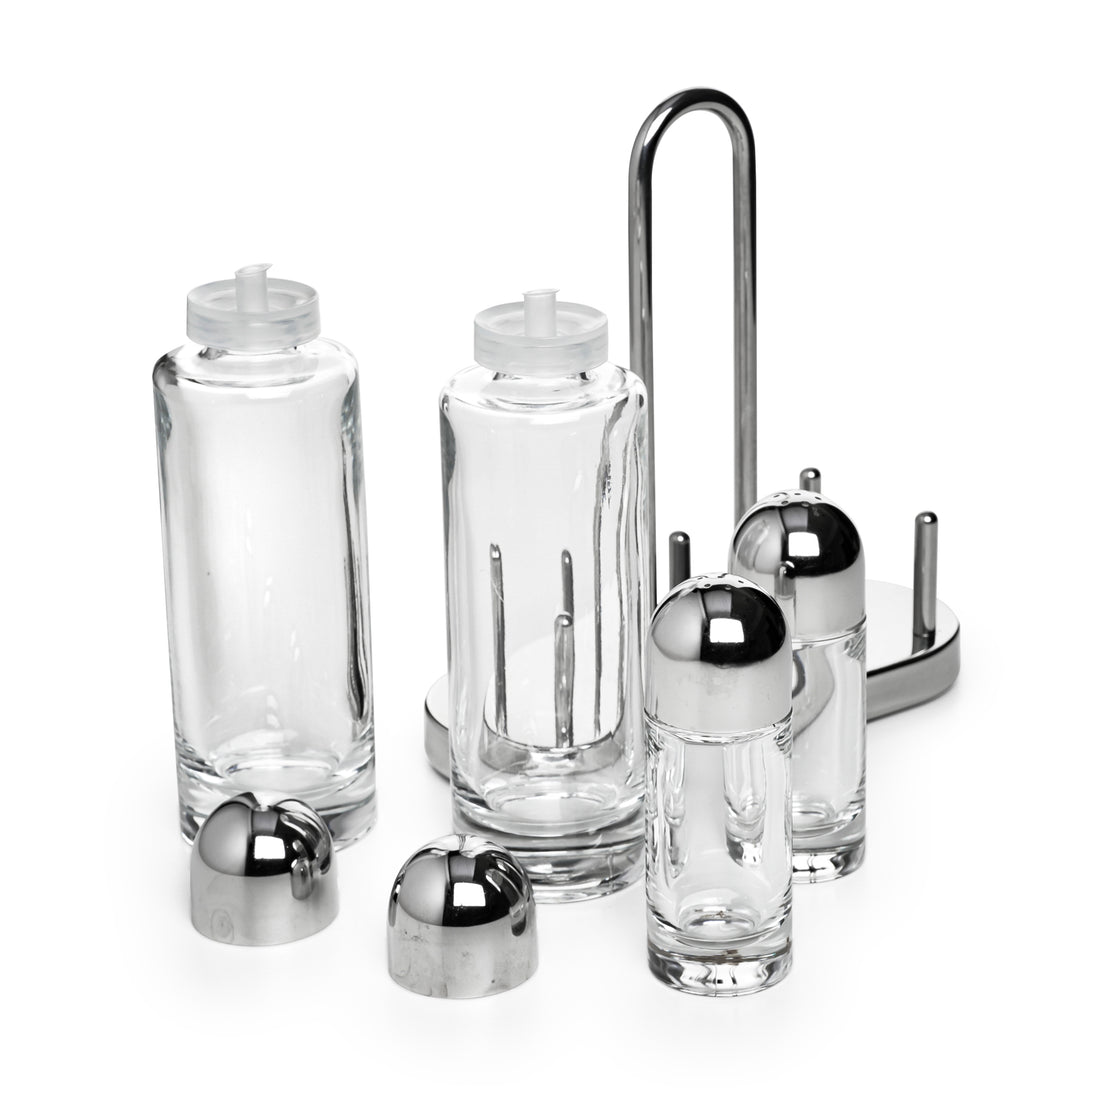 ALESSI 5070 Condiment Set - Stainless Steel & Glass